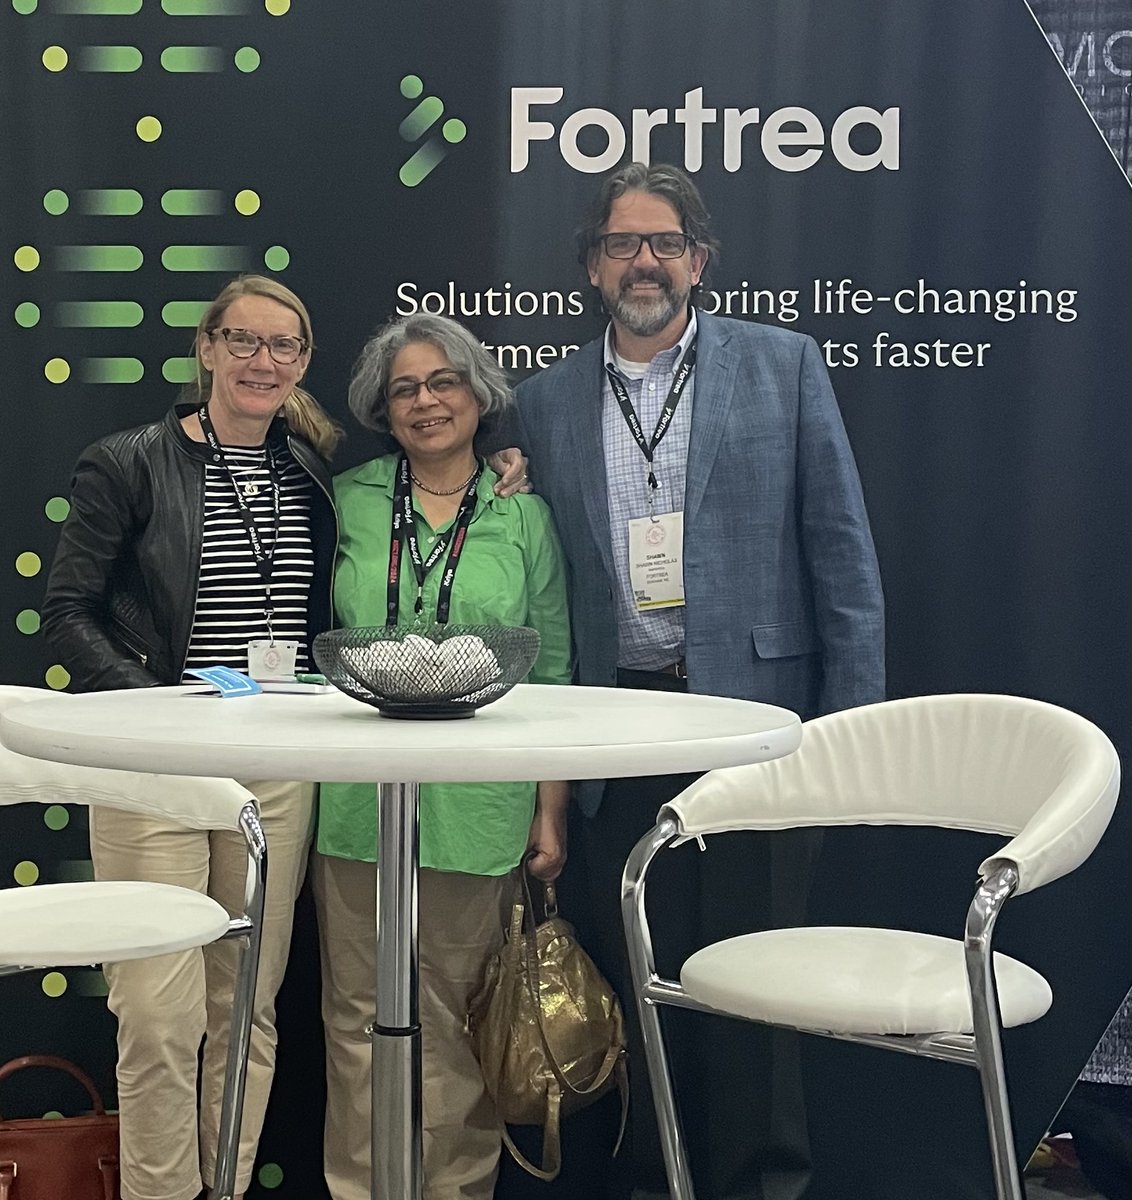 We had a great time connecting at #ASGCT2024! We hope to continue our conversations around clinical research innovation after the show. Connect with us: info.fortrea.com/sales #clinicaltrials #clinicalresearch #patientrecruitment #clinicaloperations #clinicaltrialsinnovation